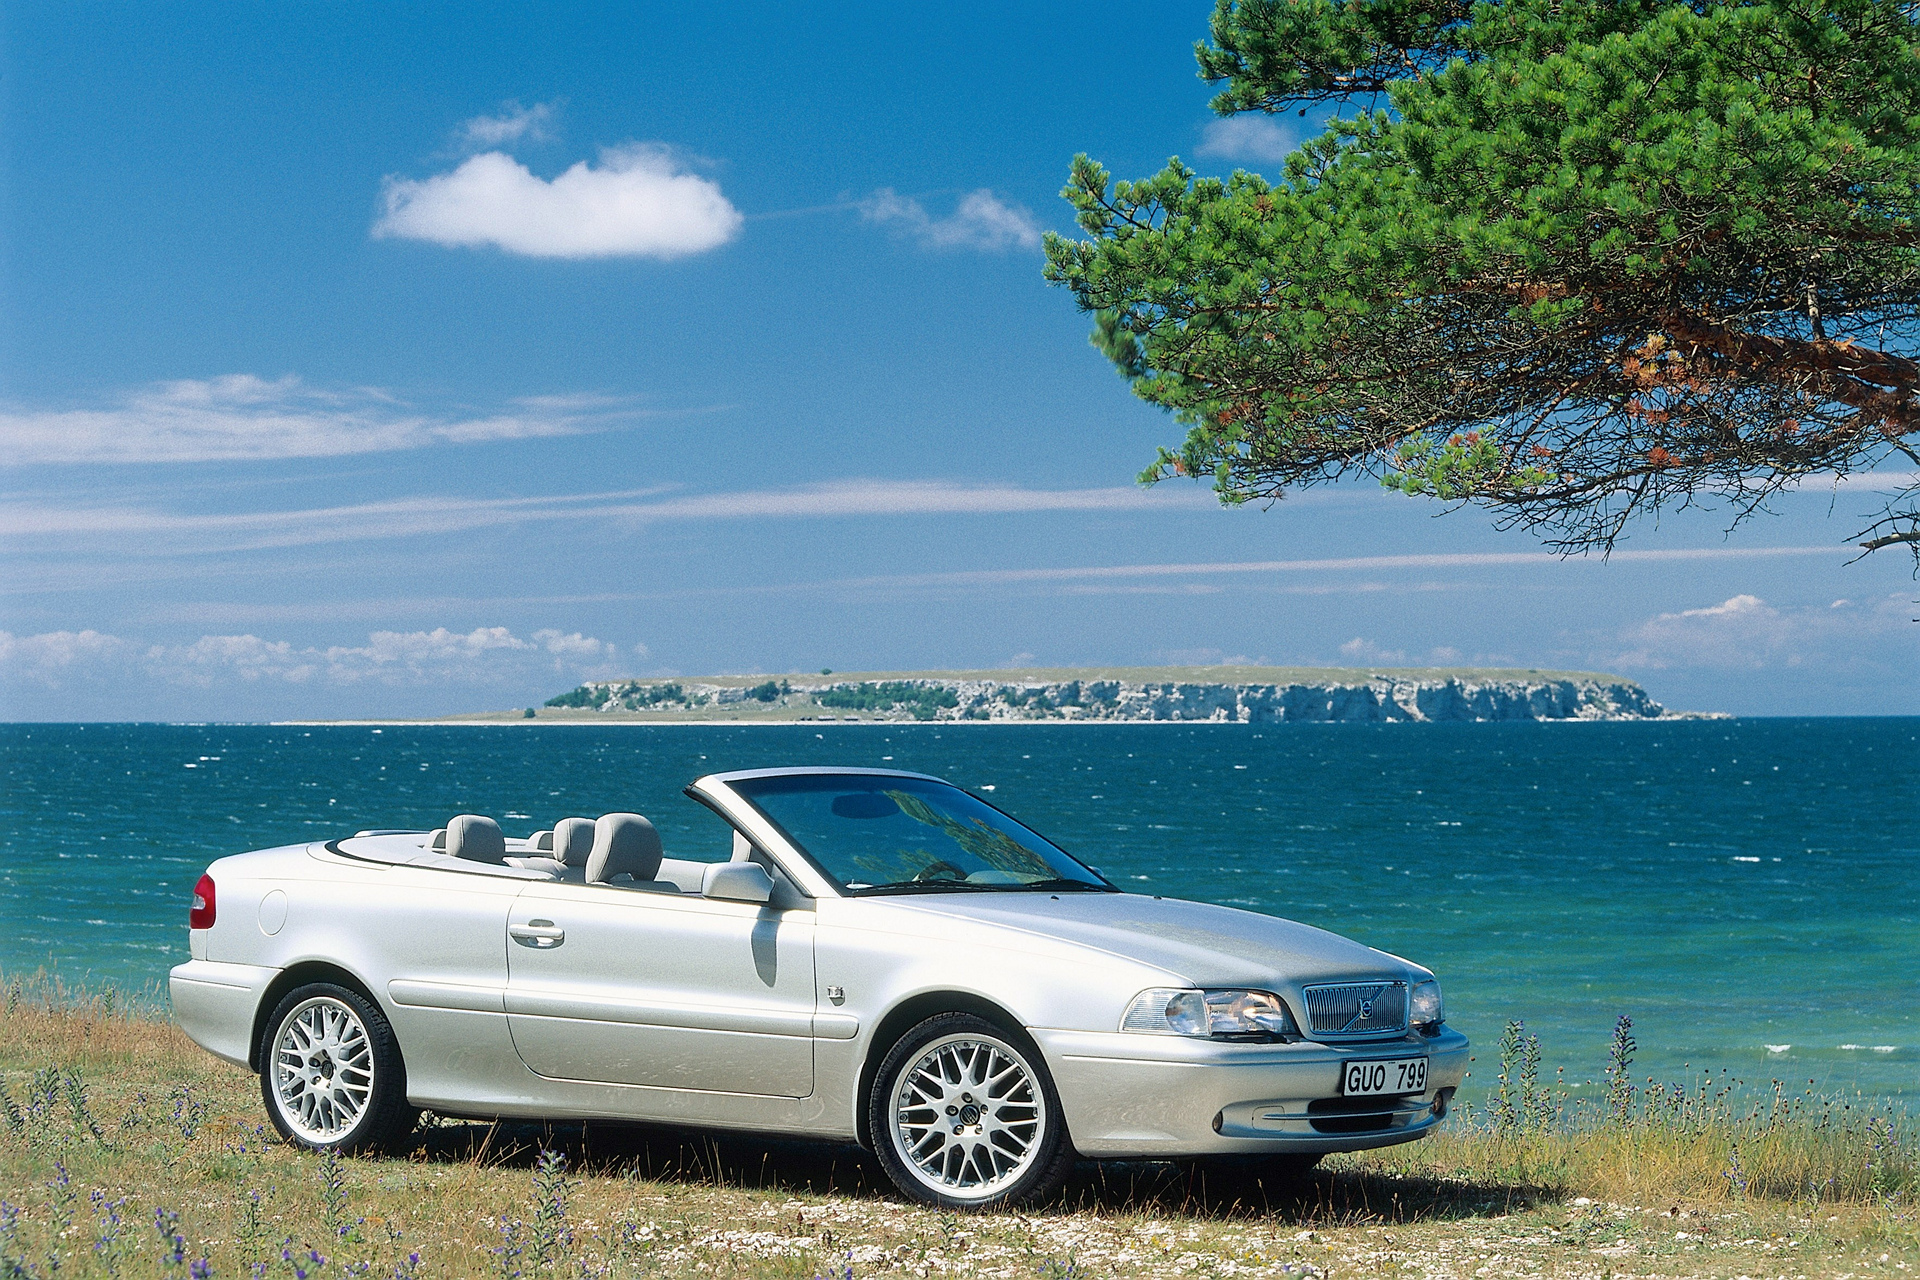 Volvo C70 Convertible © Zhejiang Geely Holding Group Co., Ltd